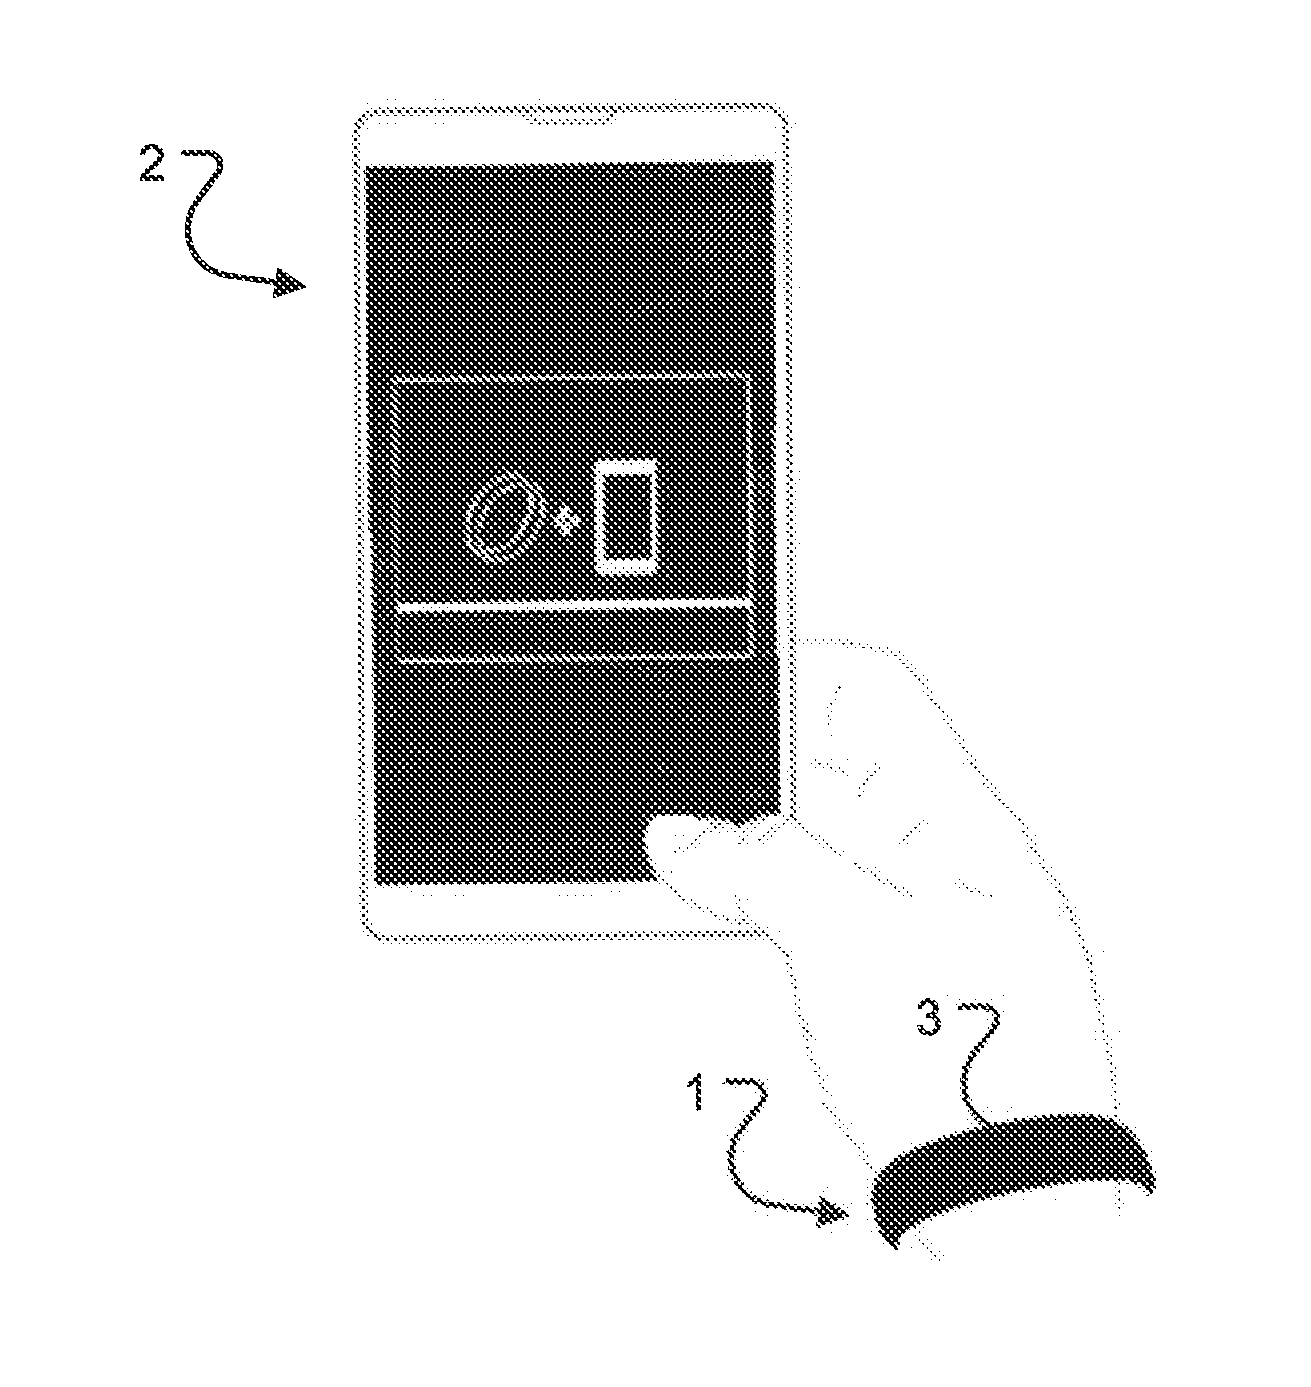 Wearable device and a method for storing credentials associated with an electronic device in said wearable device